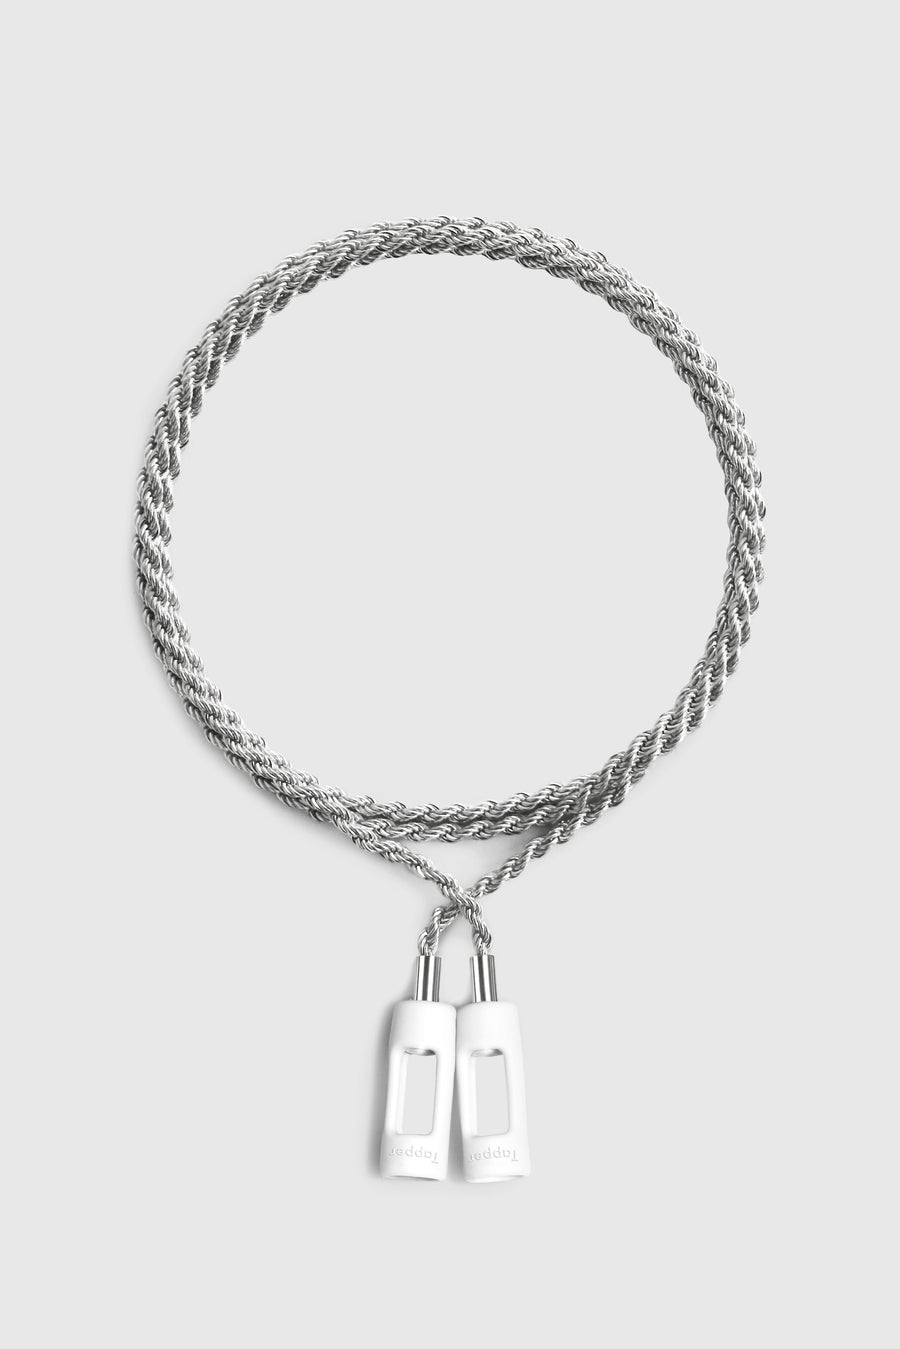 Tapper's real 925 silver plated original rope chain jewelry necklace protects your Apple AirPods & AirPods Pro. The luxurious, elevated & accessible rope chain jewellery plated in precious metals snaps the AirPods around your neck. Lost your AirPods? Magnetic lock for convenient and hassle-free safekeeping around your neck. The next must-have & affordable AirPods accessory crafted for ultimate luxury. Compatible with AirPods & AirPods Pro. Designed in Sweden by Tapper. Free Shipping at gettapper.com